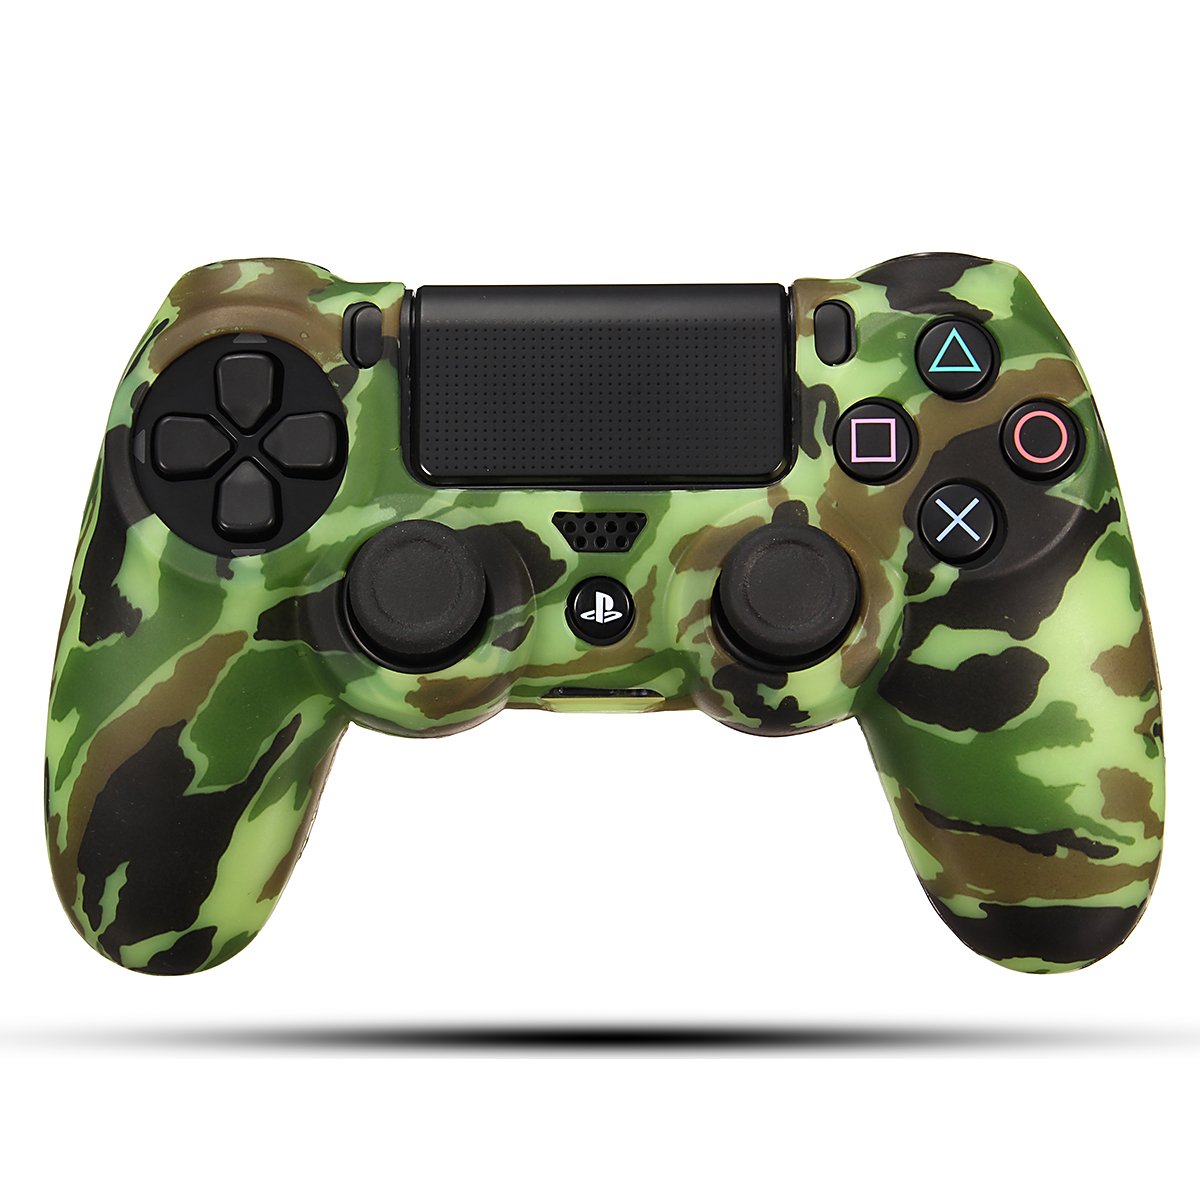 Durable Decal Camouflage Grip Cover Case Silicone Rubber Soft Skin Protector for Playstation 4 for Dualshock 4 Gamepad 1